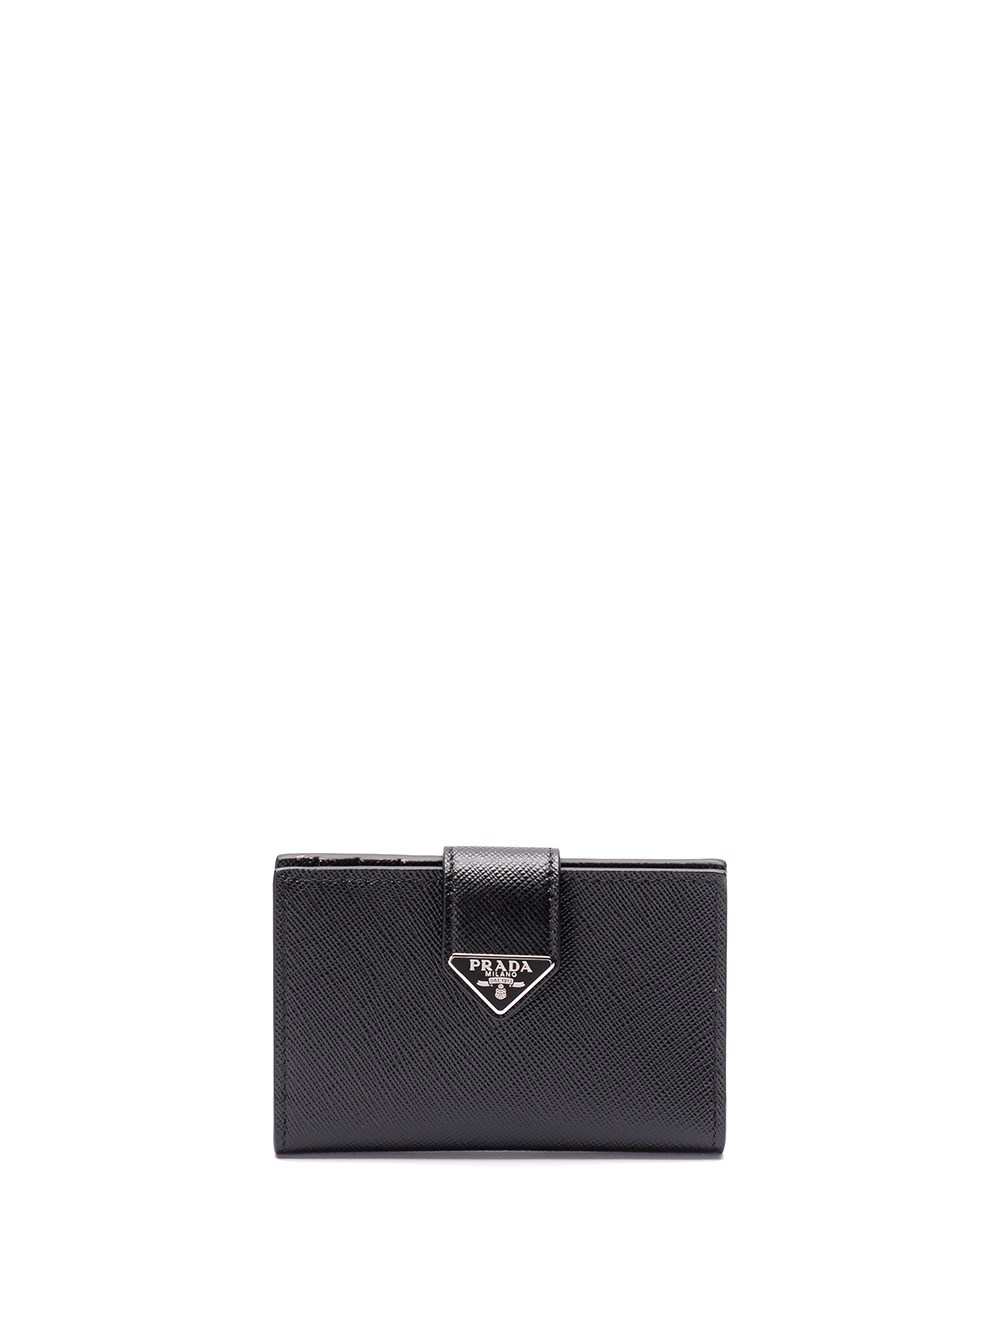 Prada Small Saffiano And Leather Wallet In Black  